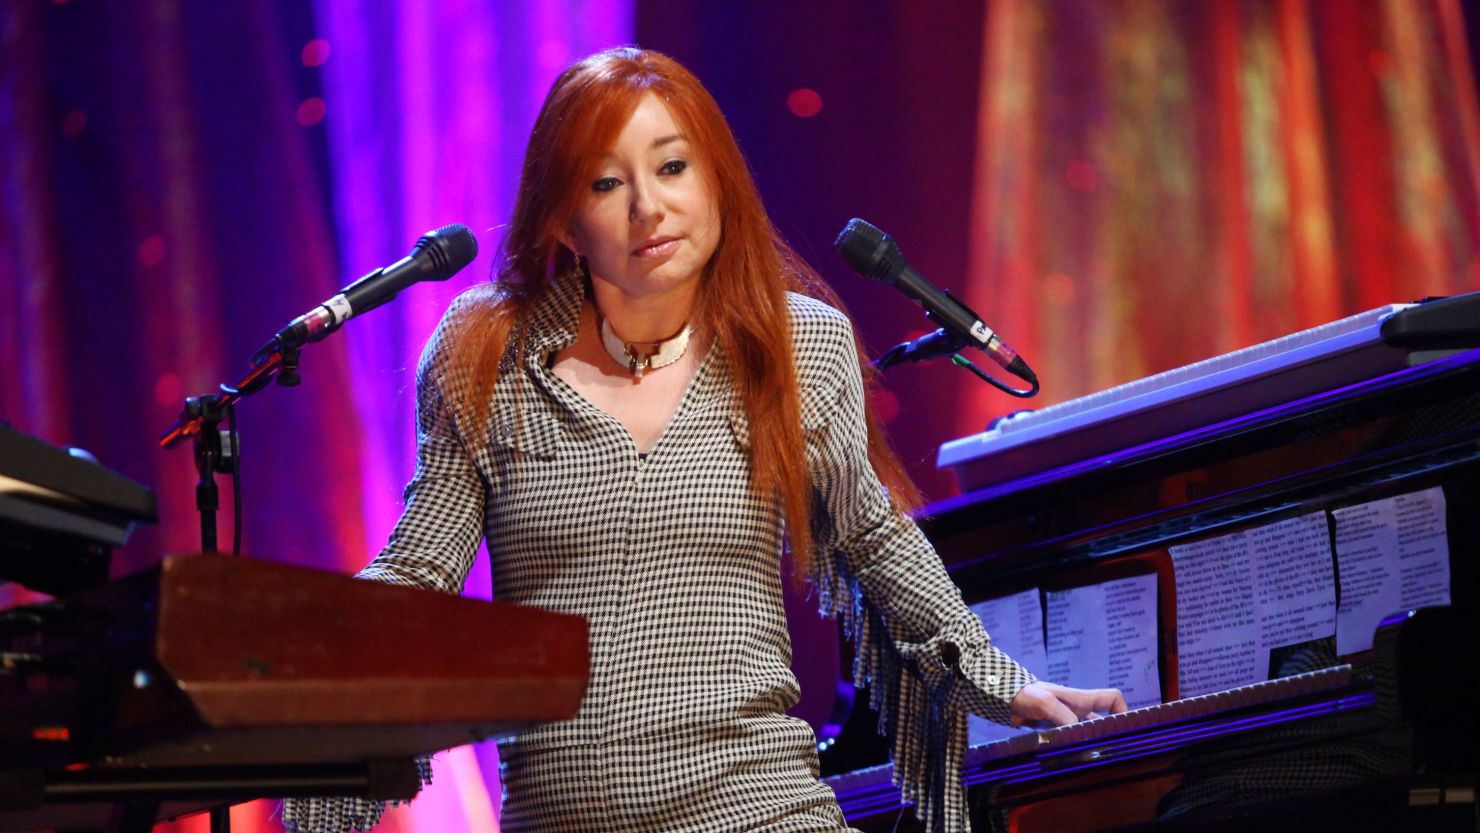 Tori Amos returns to the piano for her newest album, "Night of Hunters."